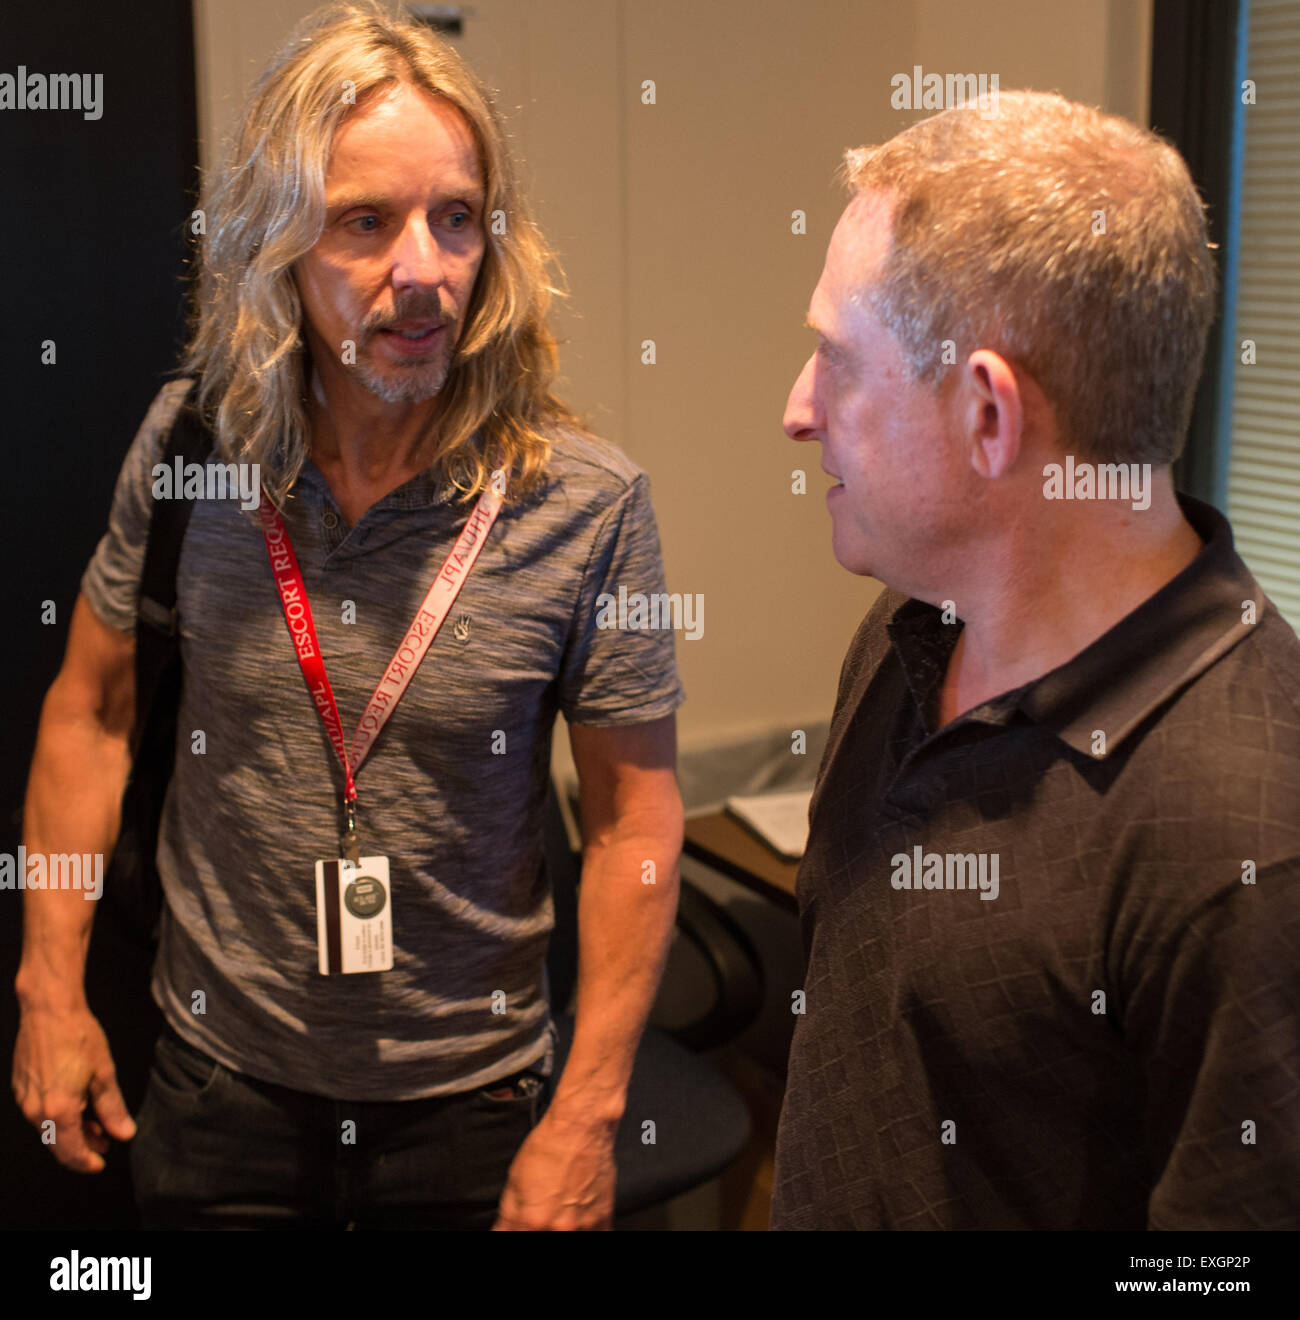 Tommy Shaw of the band Styx, left, meets with Alan Stern, New Horizons principal investigator, Wednesday, July 1, 2015 at The Johns Hopkins University Applied Physics Laboratory in Laurel, Md.  Members of the band Styx visited with New Horizons team members and Mark Showalter, who discovered Pluto's fifth moon, Styx, in July of 2012. Stock Photo